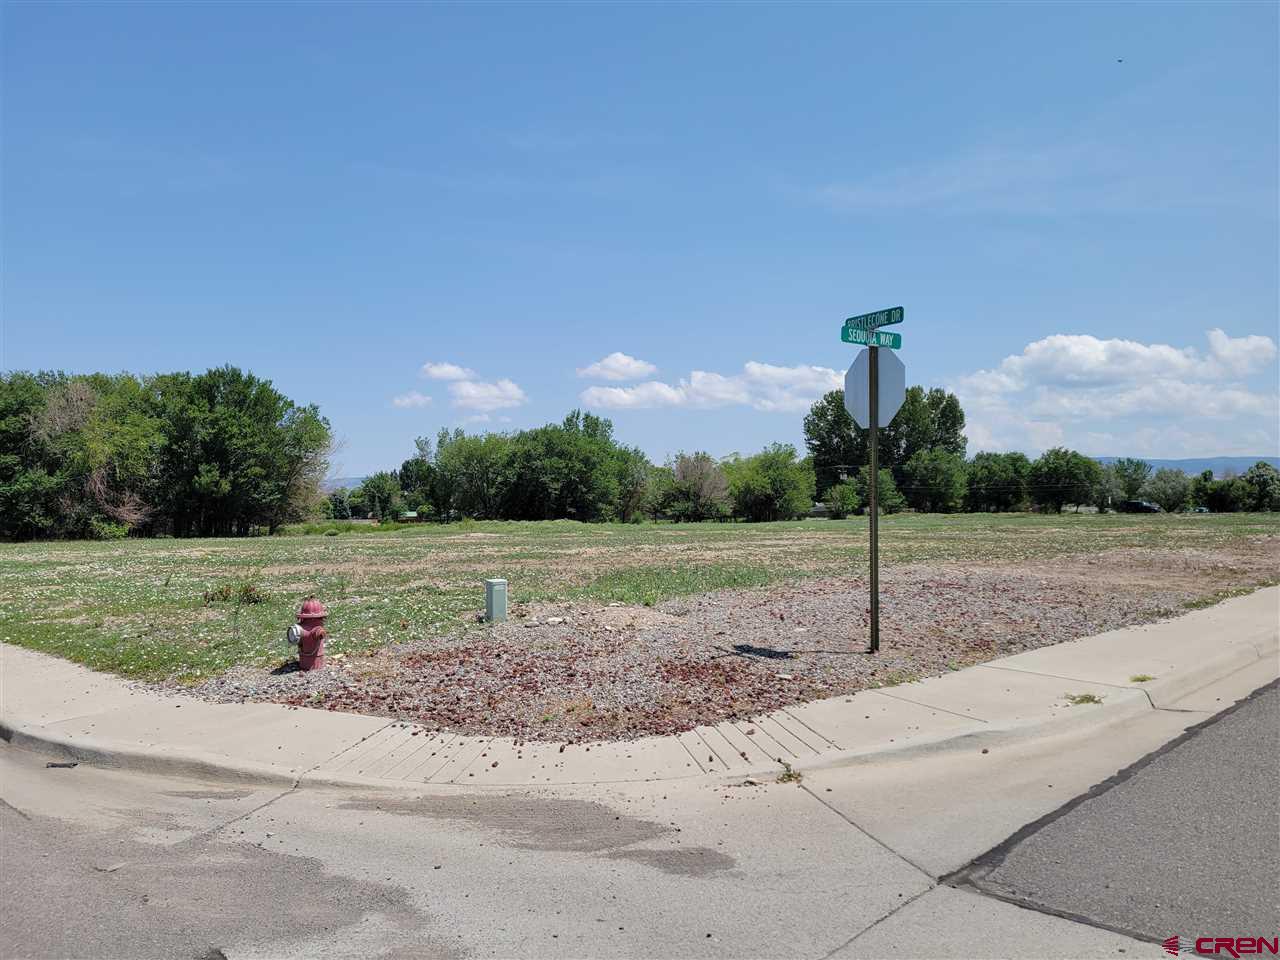 Two parcels: Lot 3 of the Ponderosa Ranch subdivision borders Bristlecone Drive, Marine Drive and Sequoia Way is approx. 2.8 acres zoned Business-2.  Parcel 3 has a paid sewer tap. Back parcel, Lot 5 fronts Marine Drive and is approx. 1.7 Acres zoned R-6.  Zoning allows duplexes, see attached zoning guidelines.   Both lots have an ILC.  Lot 5 has a new Phase I report.  Neither are subject to the Ponderosa Ranch subdivision association.   Buyer to verify with the City of Montrose on zoning and desired use. Parcels may be sold separately.  Call for pricing.